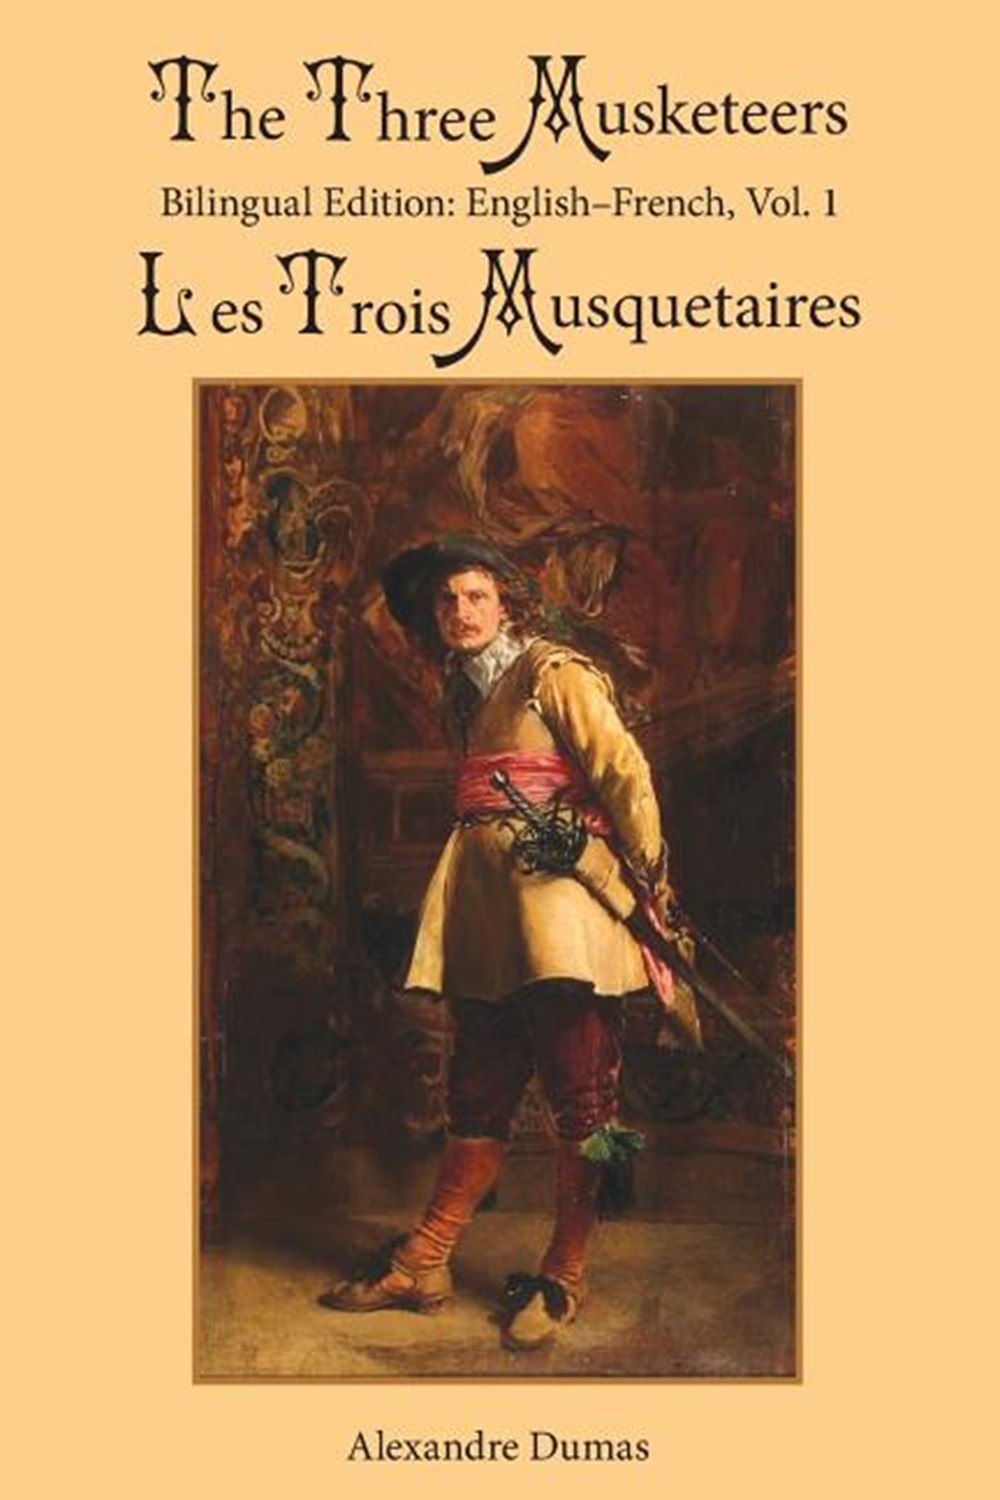 Three Musketeers, Vol. 1: Bilingual Edition: English-French